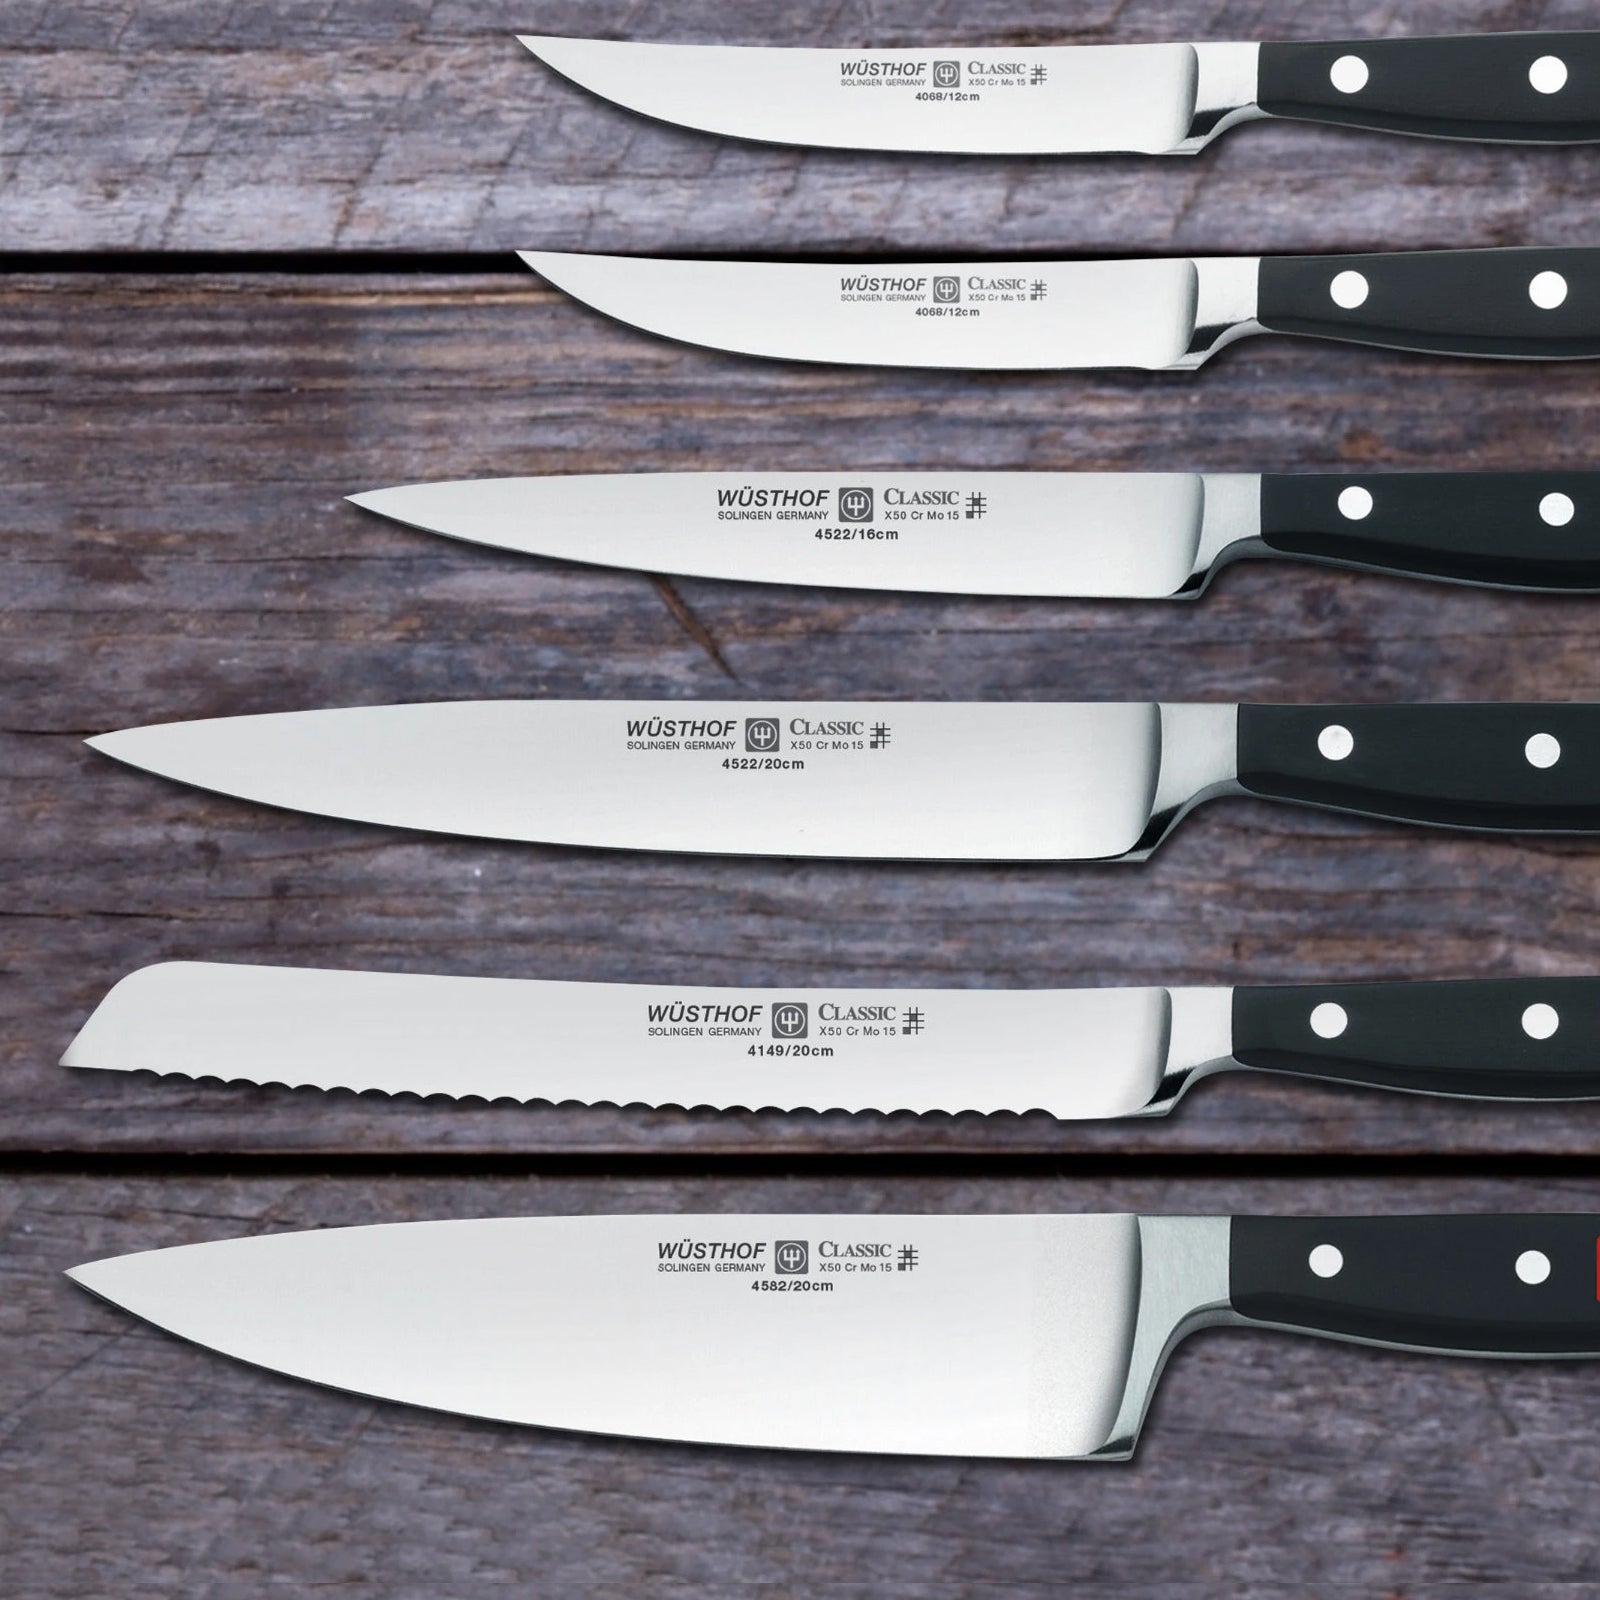 Serrated Knife vs Plain Edge: What's the Difference? - Exquisite Knives